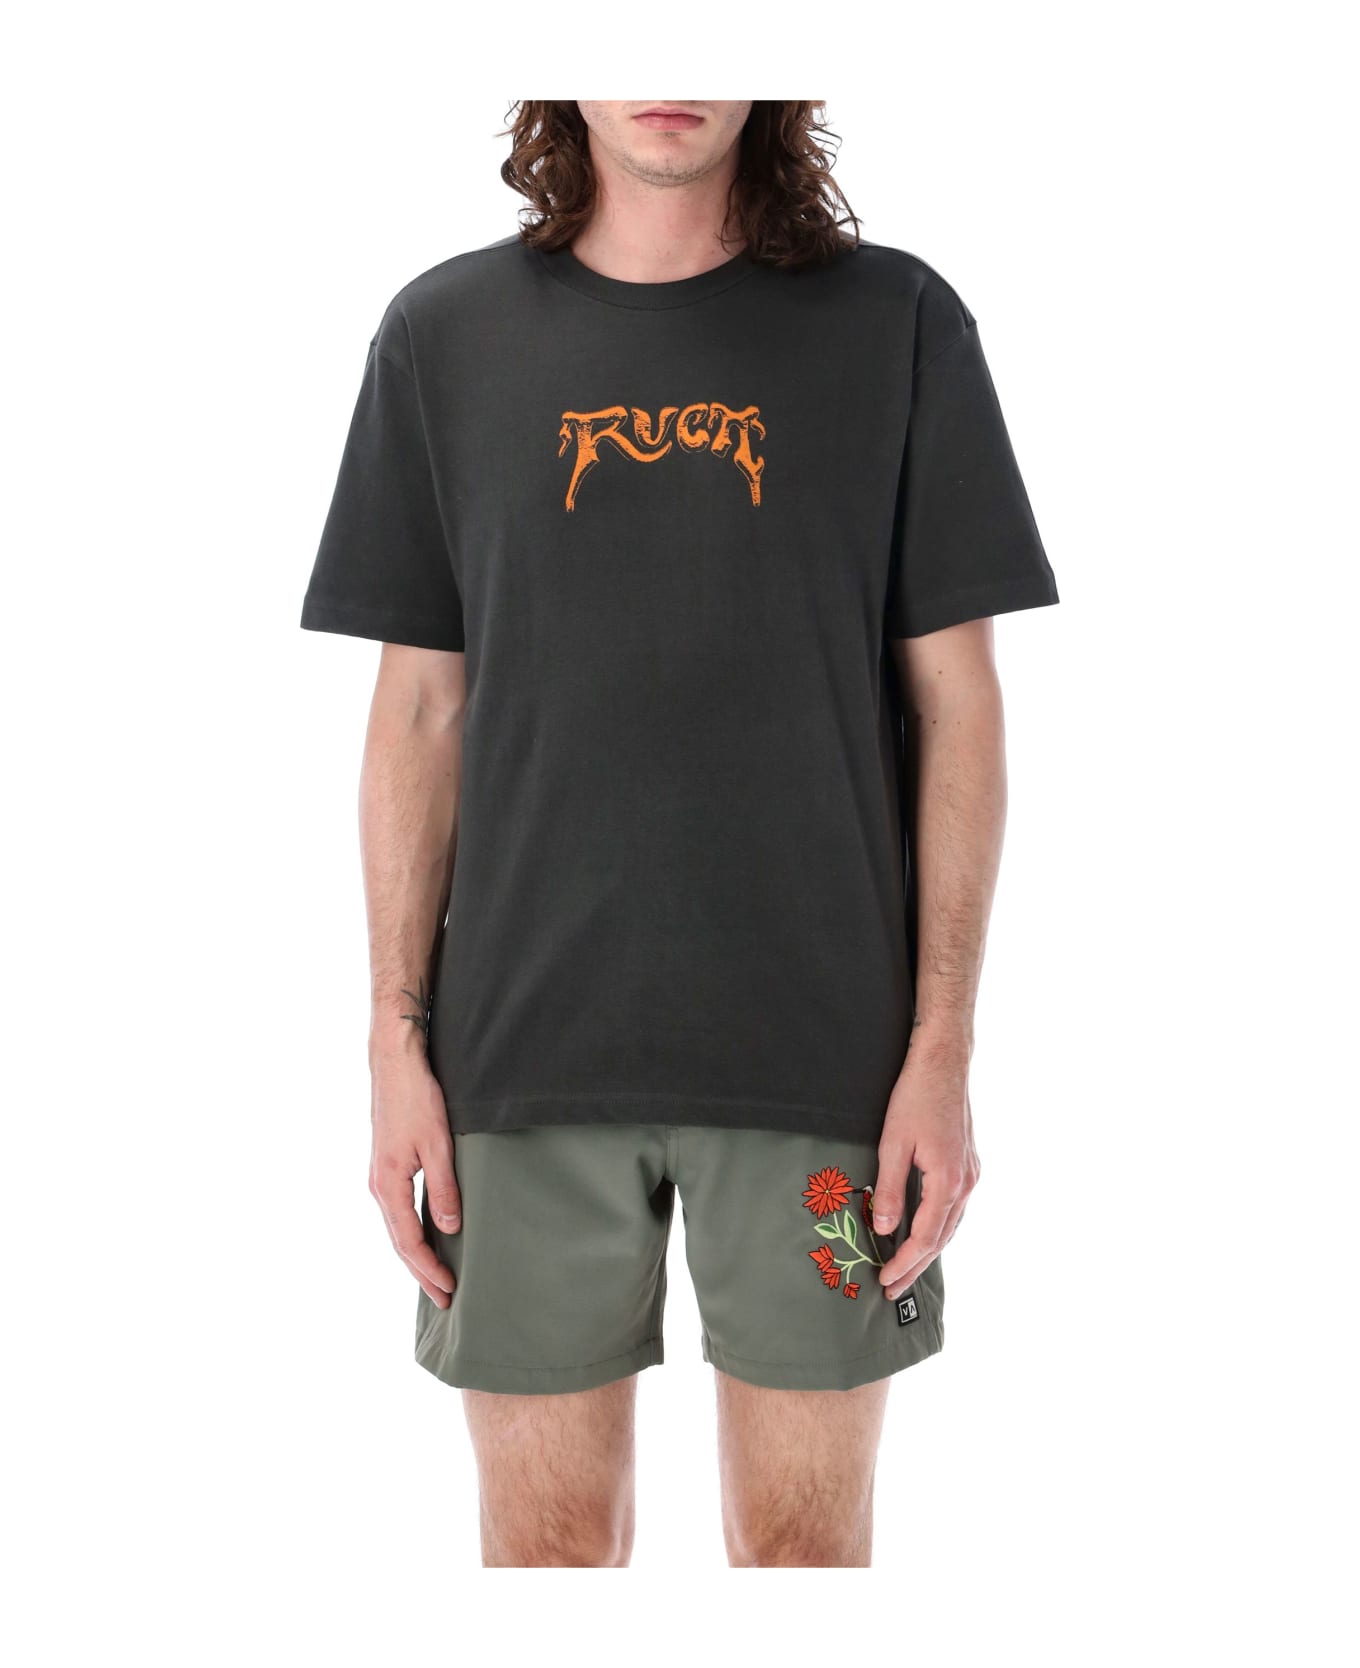 RVCA Unearthed T-shirt - BLACK